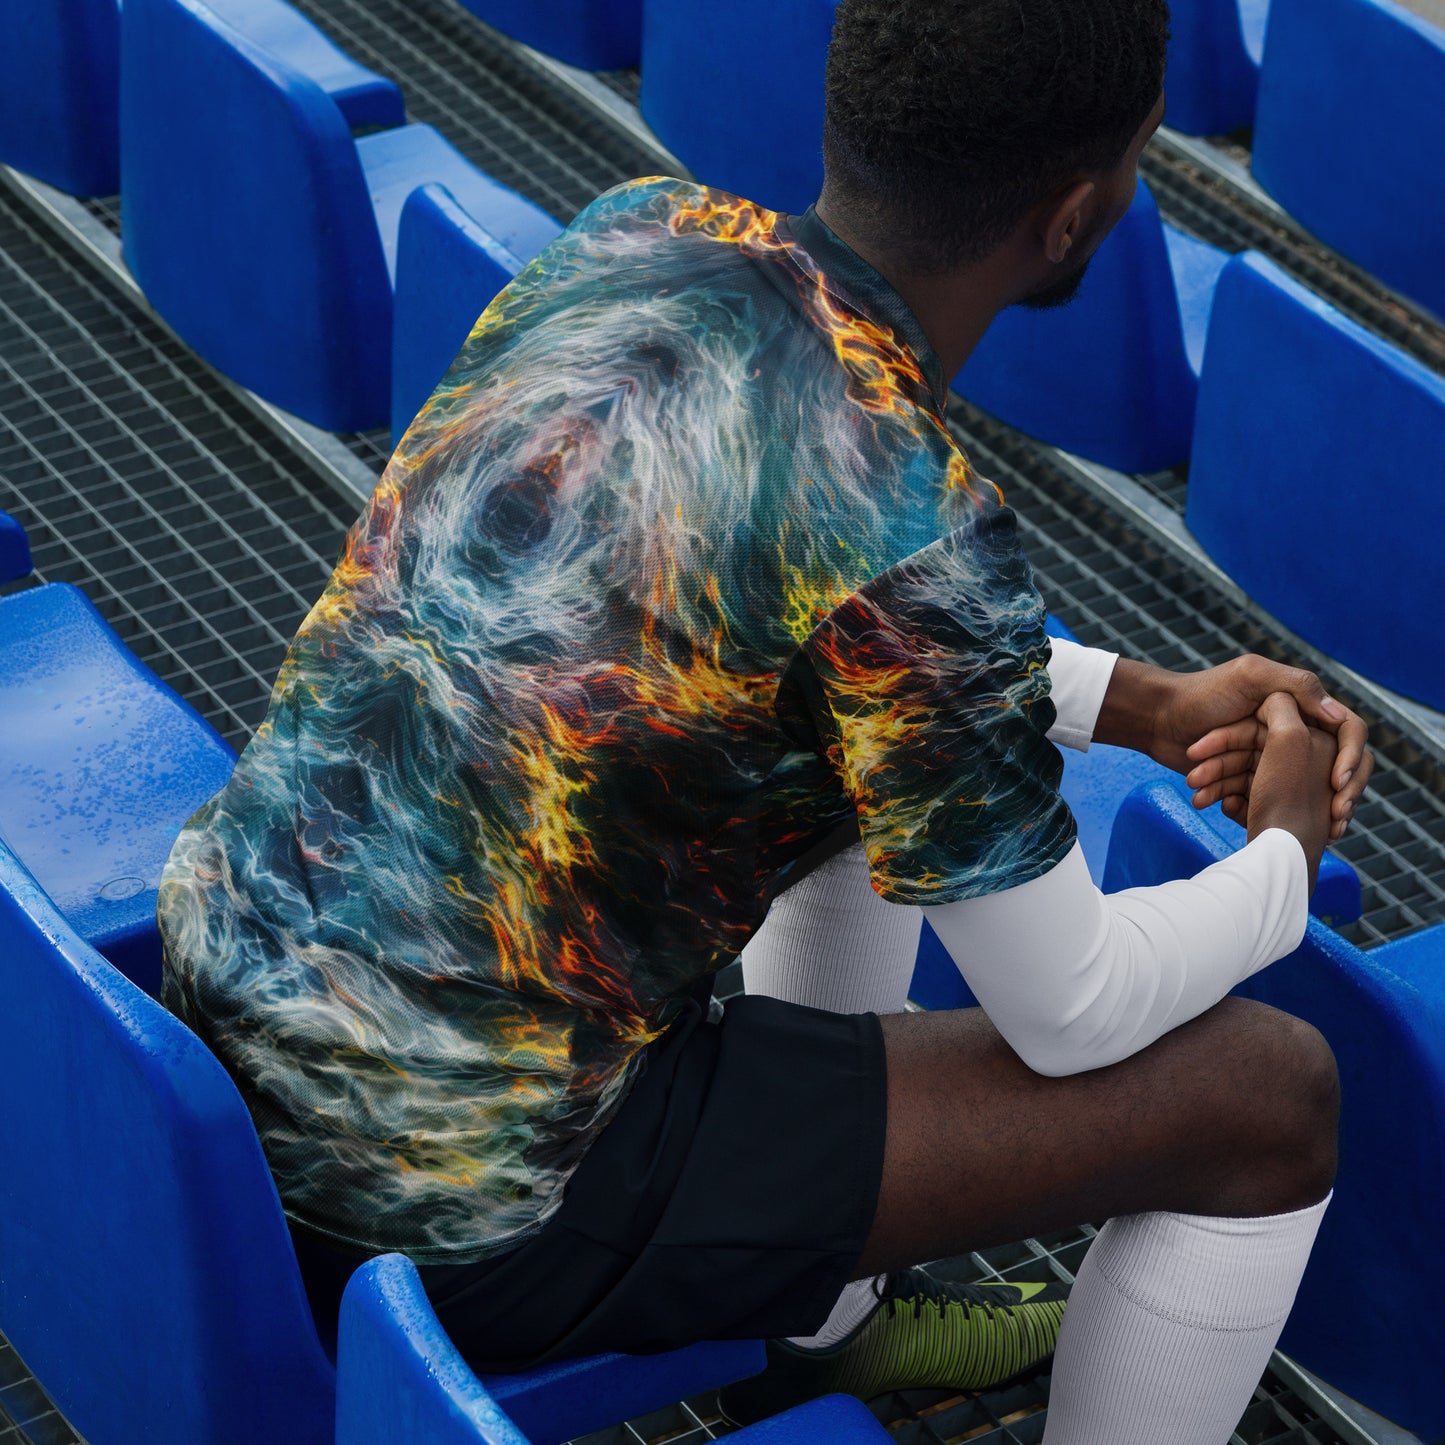 Distorted Universe : Recycled unisex sports jersey